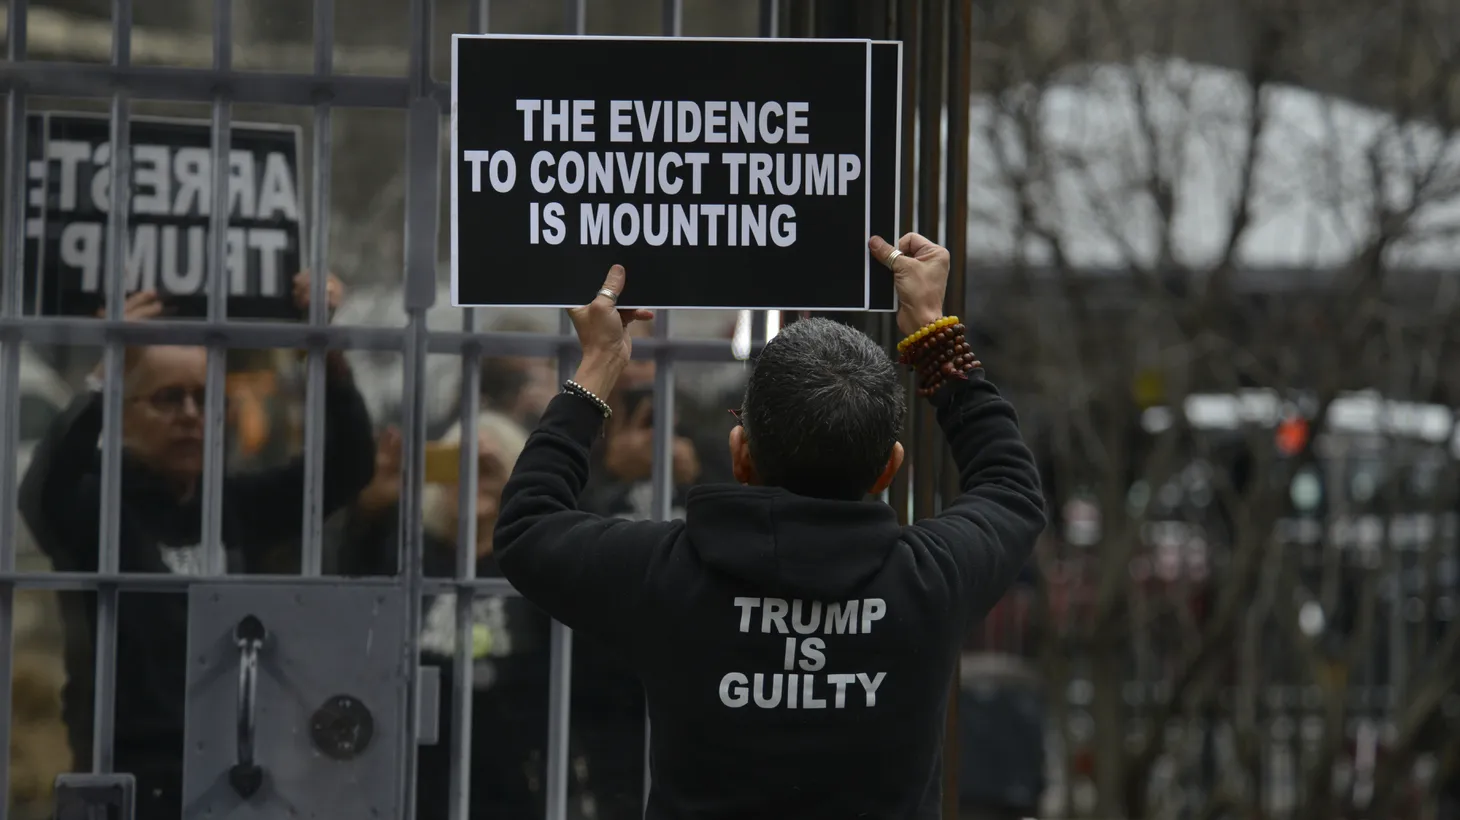 Anti-Trump protesters gathers outside the Manhattan District Attorney's office in New York City, on March 23, 2023. The drama surrounding Trump's possible indictment over hush money paid to a porn star took a new twist March 22 after a New York grand jury failed to convene as expected. Speculation that a historic indictment of a former president may be imminent has been building ever since Trump himself announced he was expecting to be arrested.